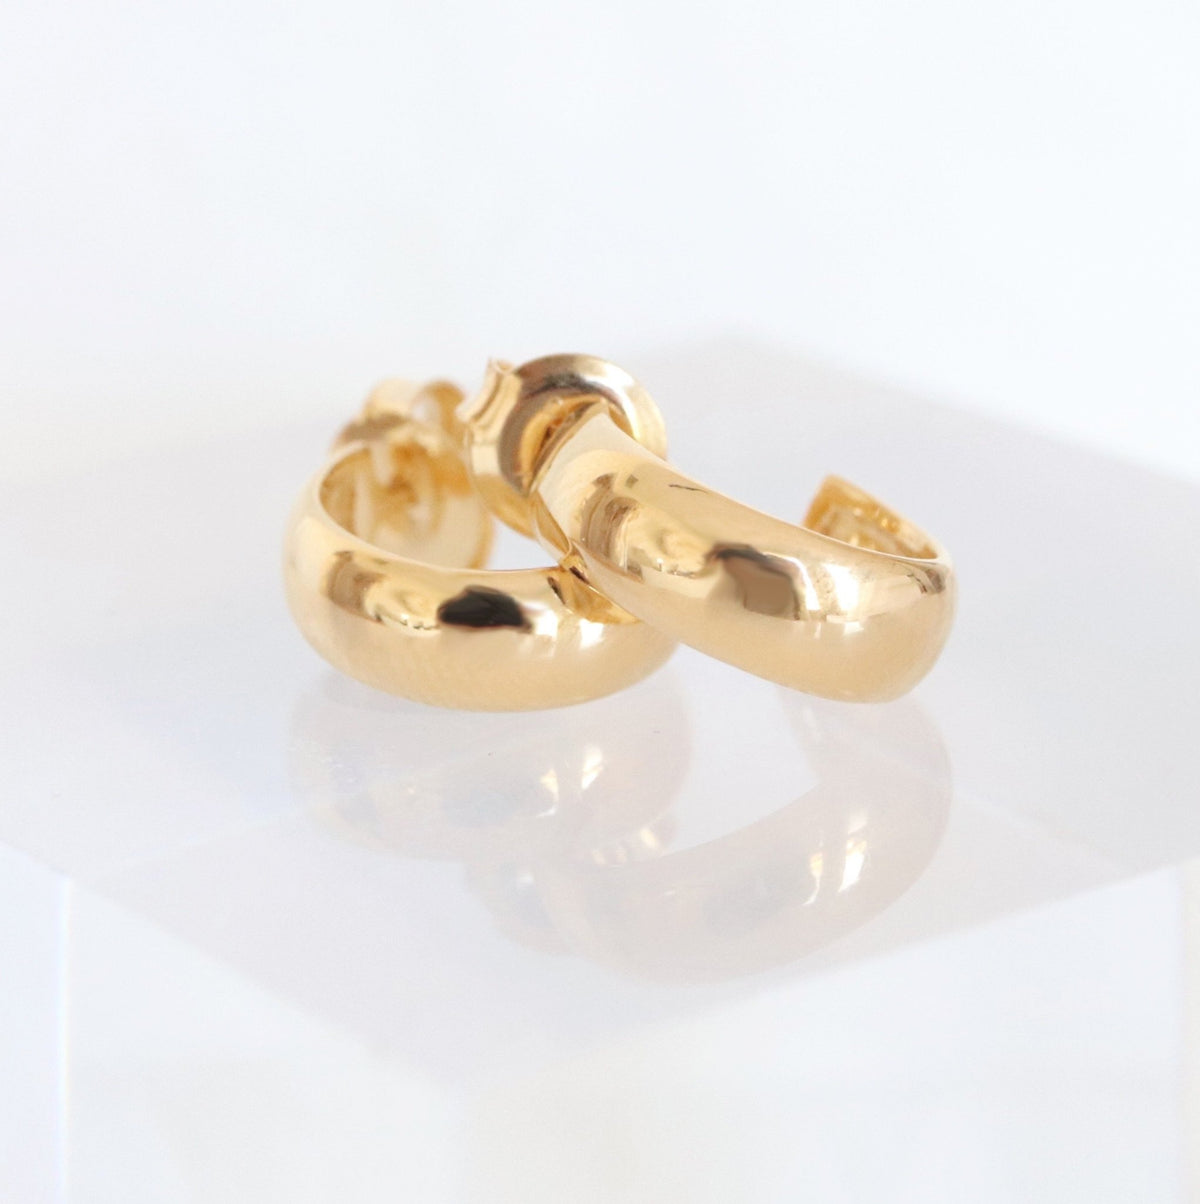 POISE HUGGIE HOOPS - GOLD - SO PRETTY CARA COTTER